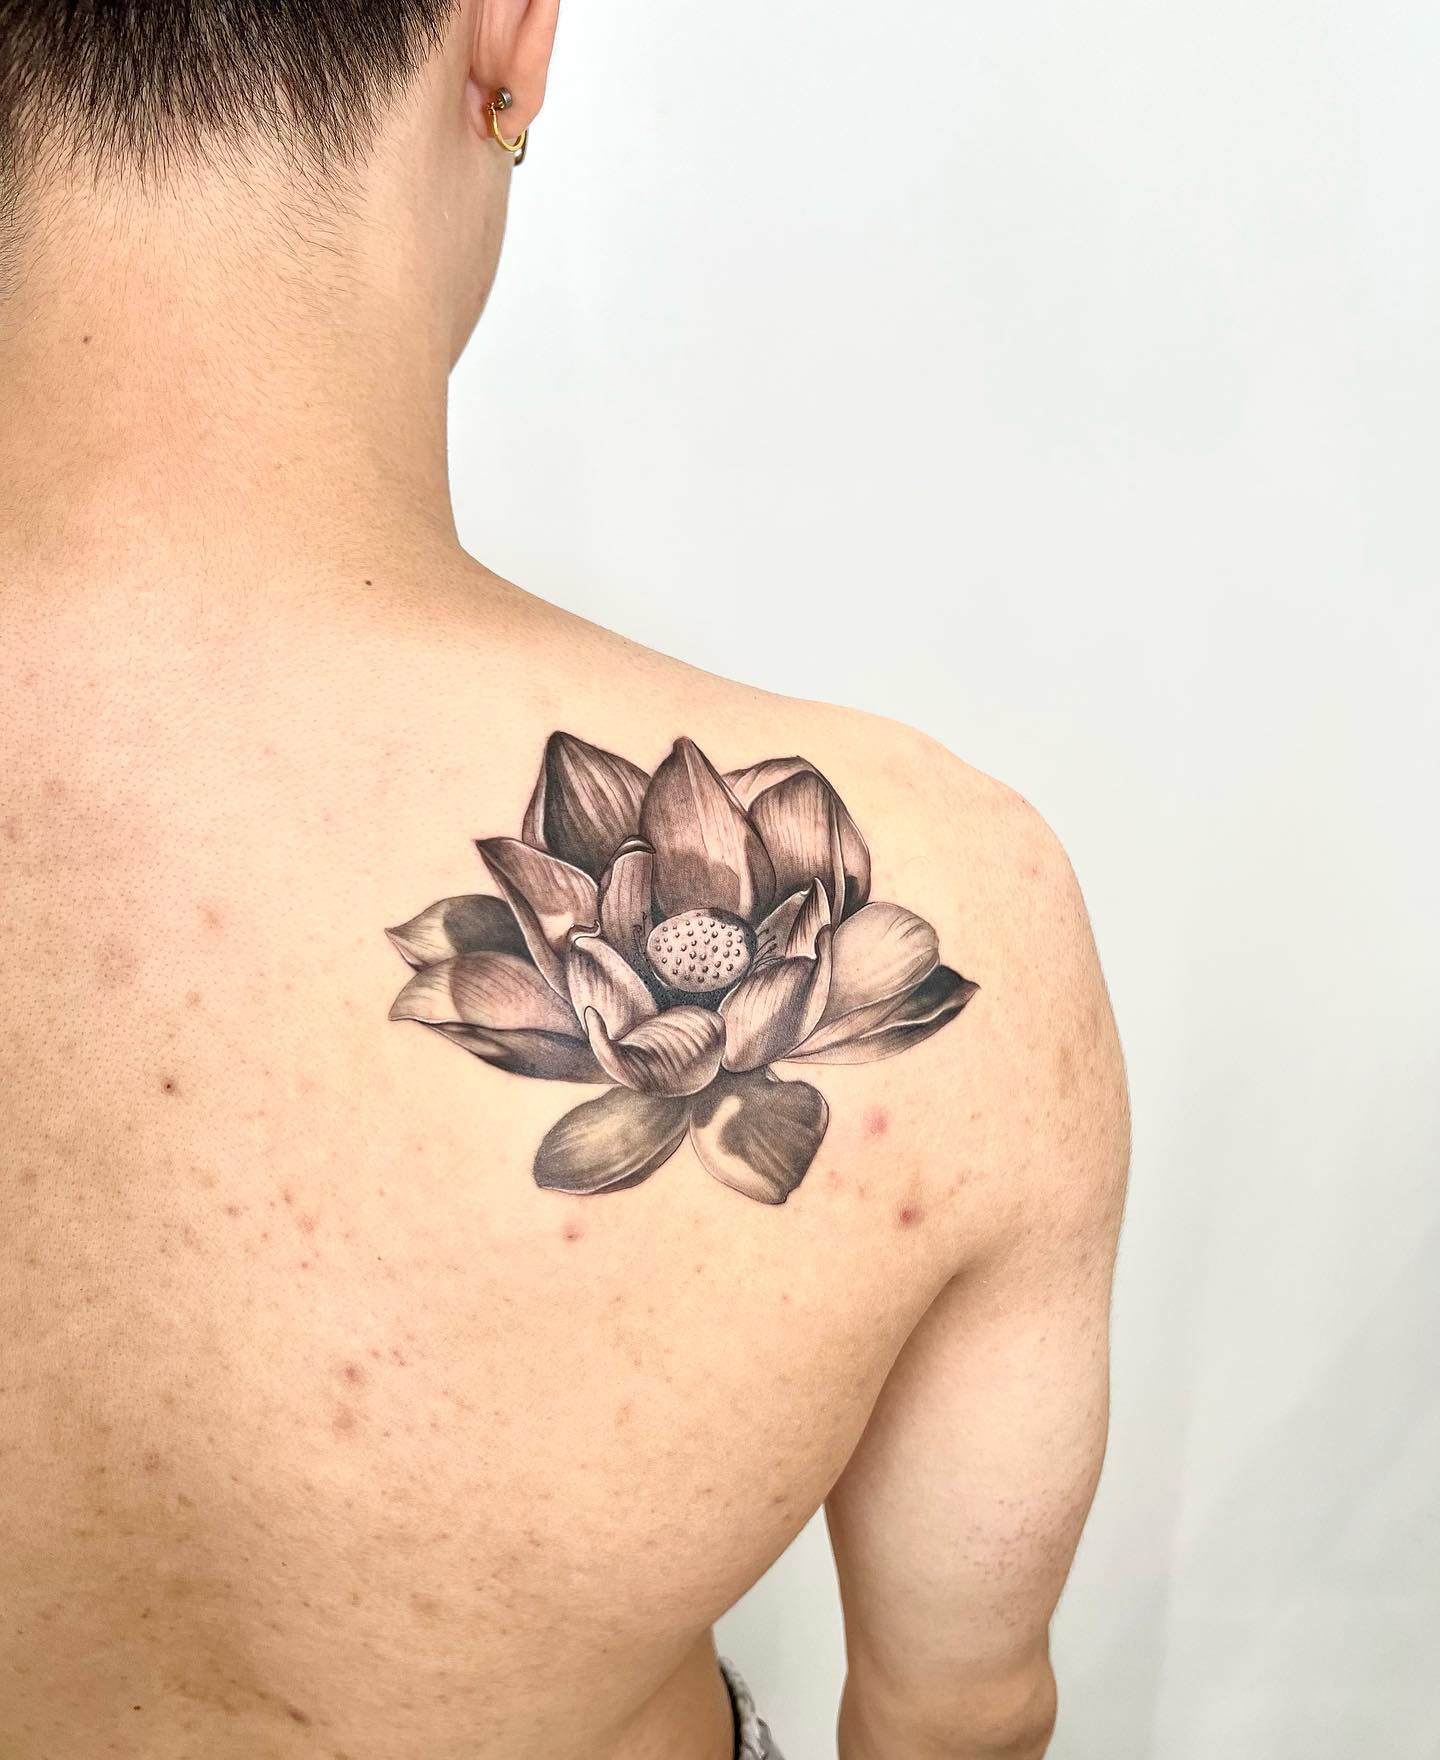 Cool giant lotus flower that will take 2-3 hours to do and place on your back shoulder.